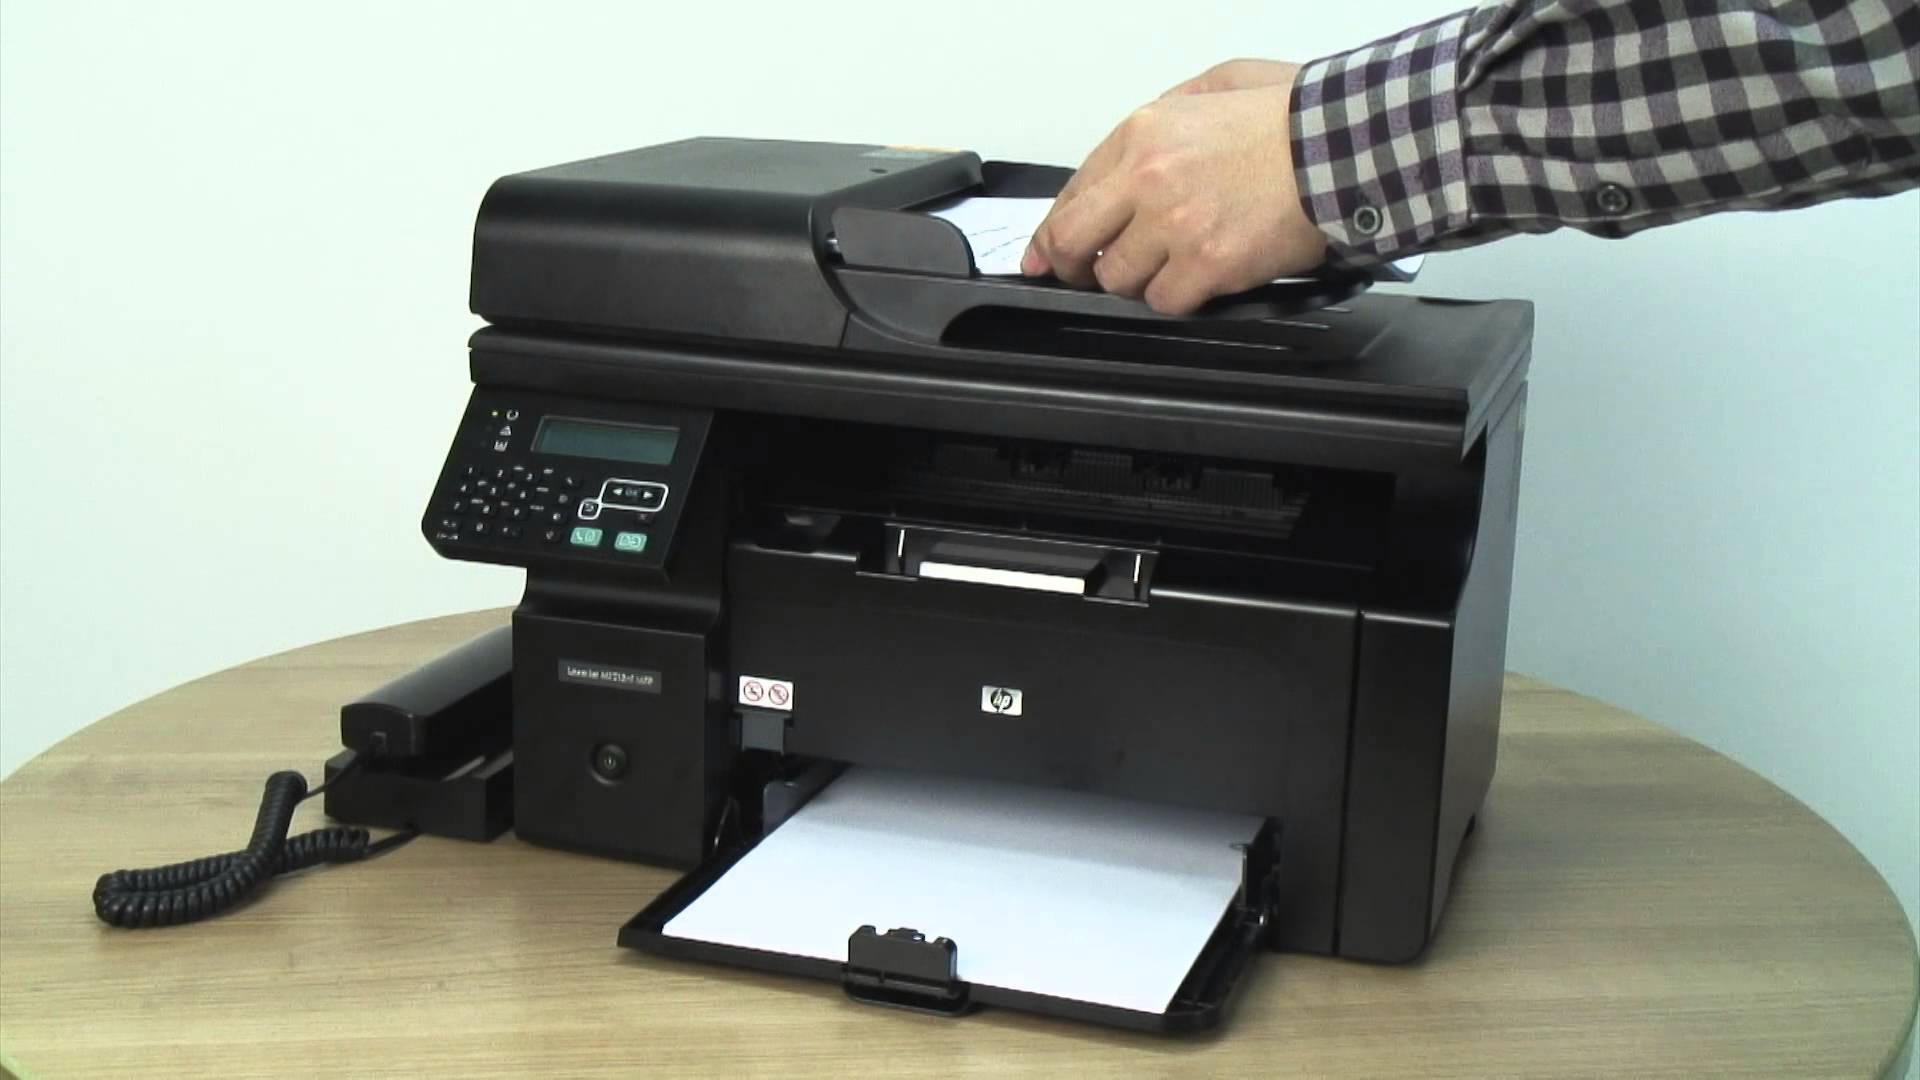 Multifunctional printers with the ability to send faxes to Israeli offices